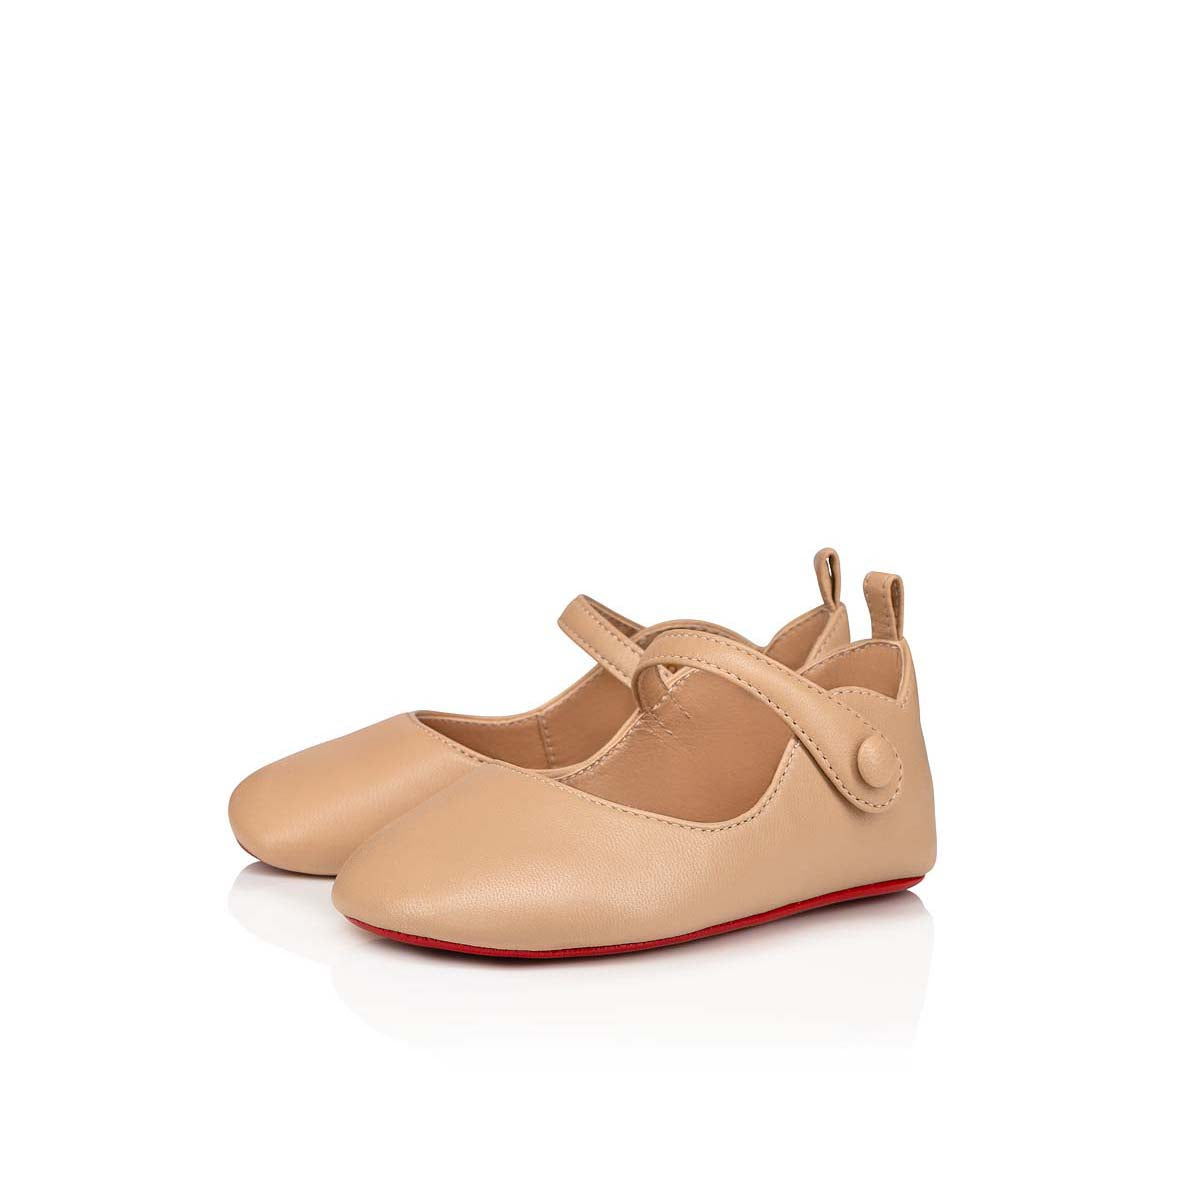 Christian Louboutin Baby Love Chick Kids Unisex Shoes | Color Beige